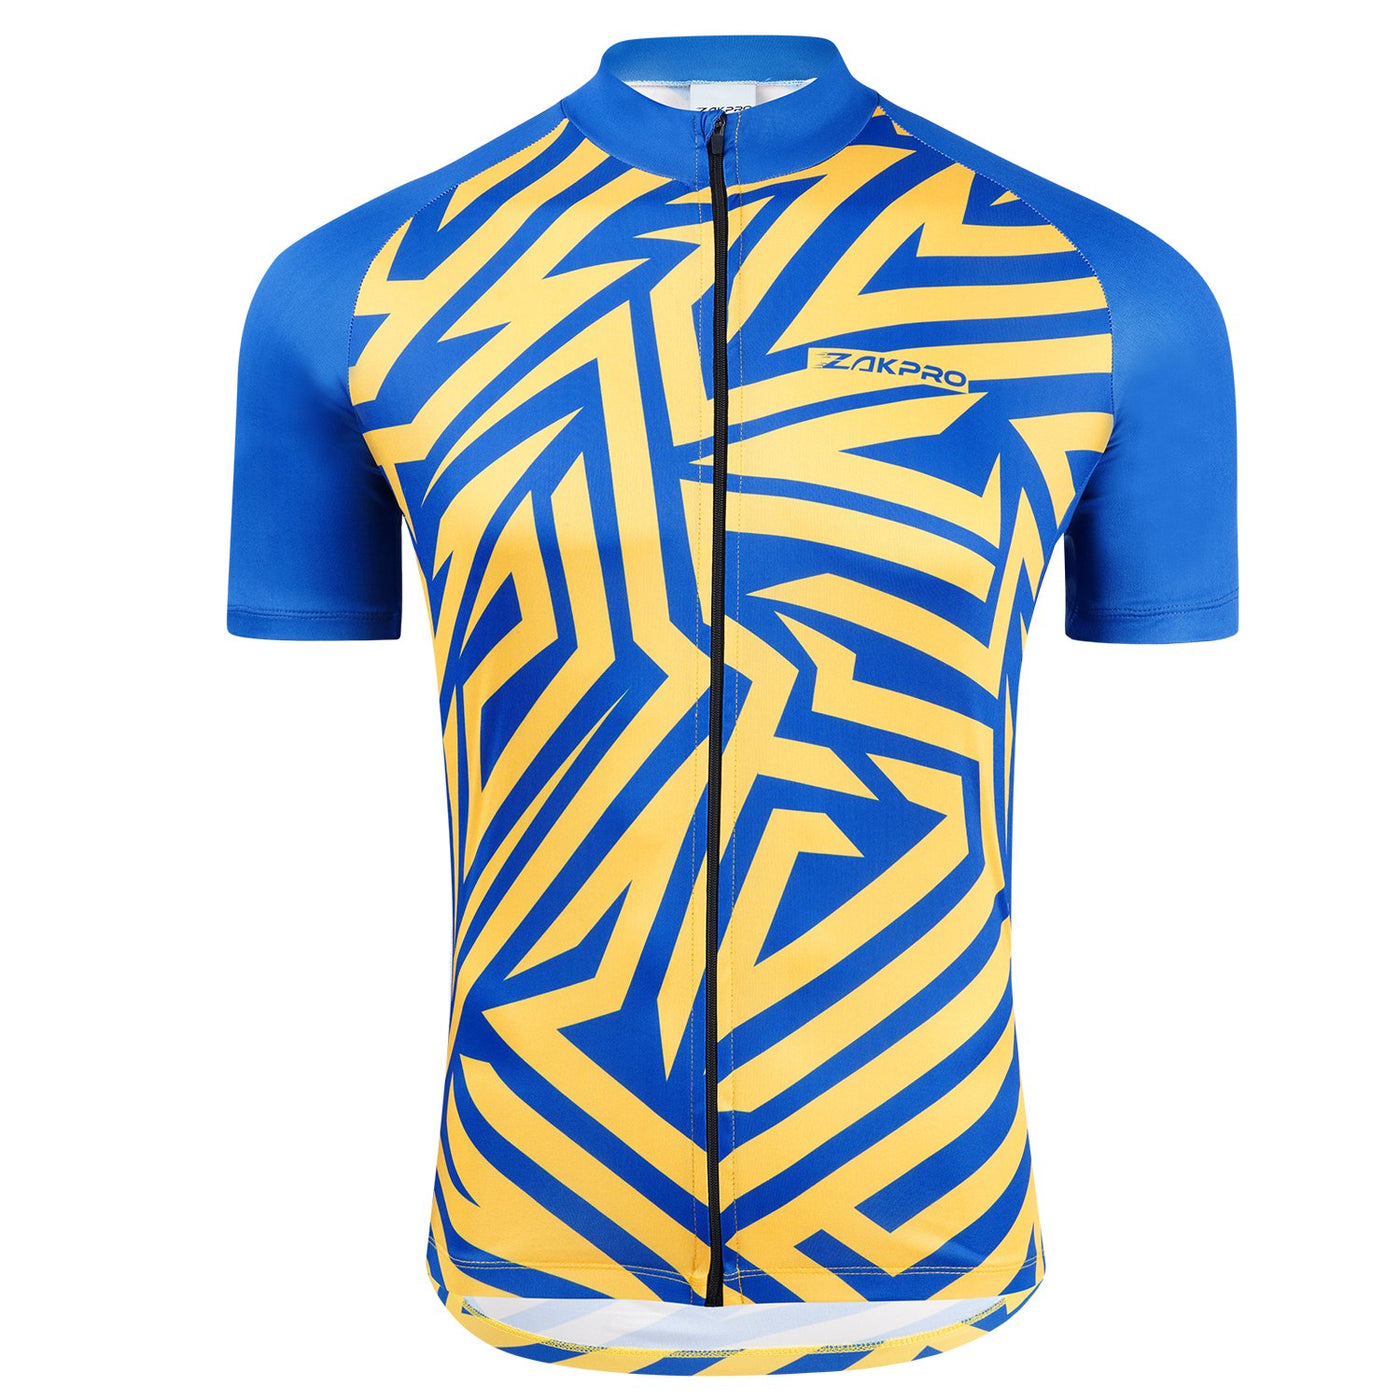 ZAKPRO - Cycling Jersey, Kuhl - Z004 - Cyclop.in